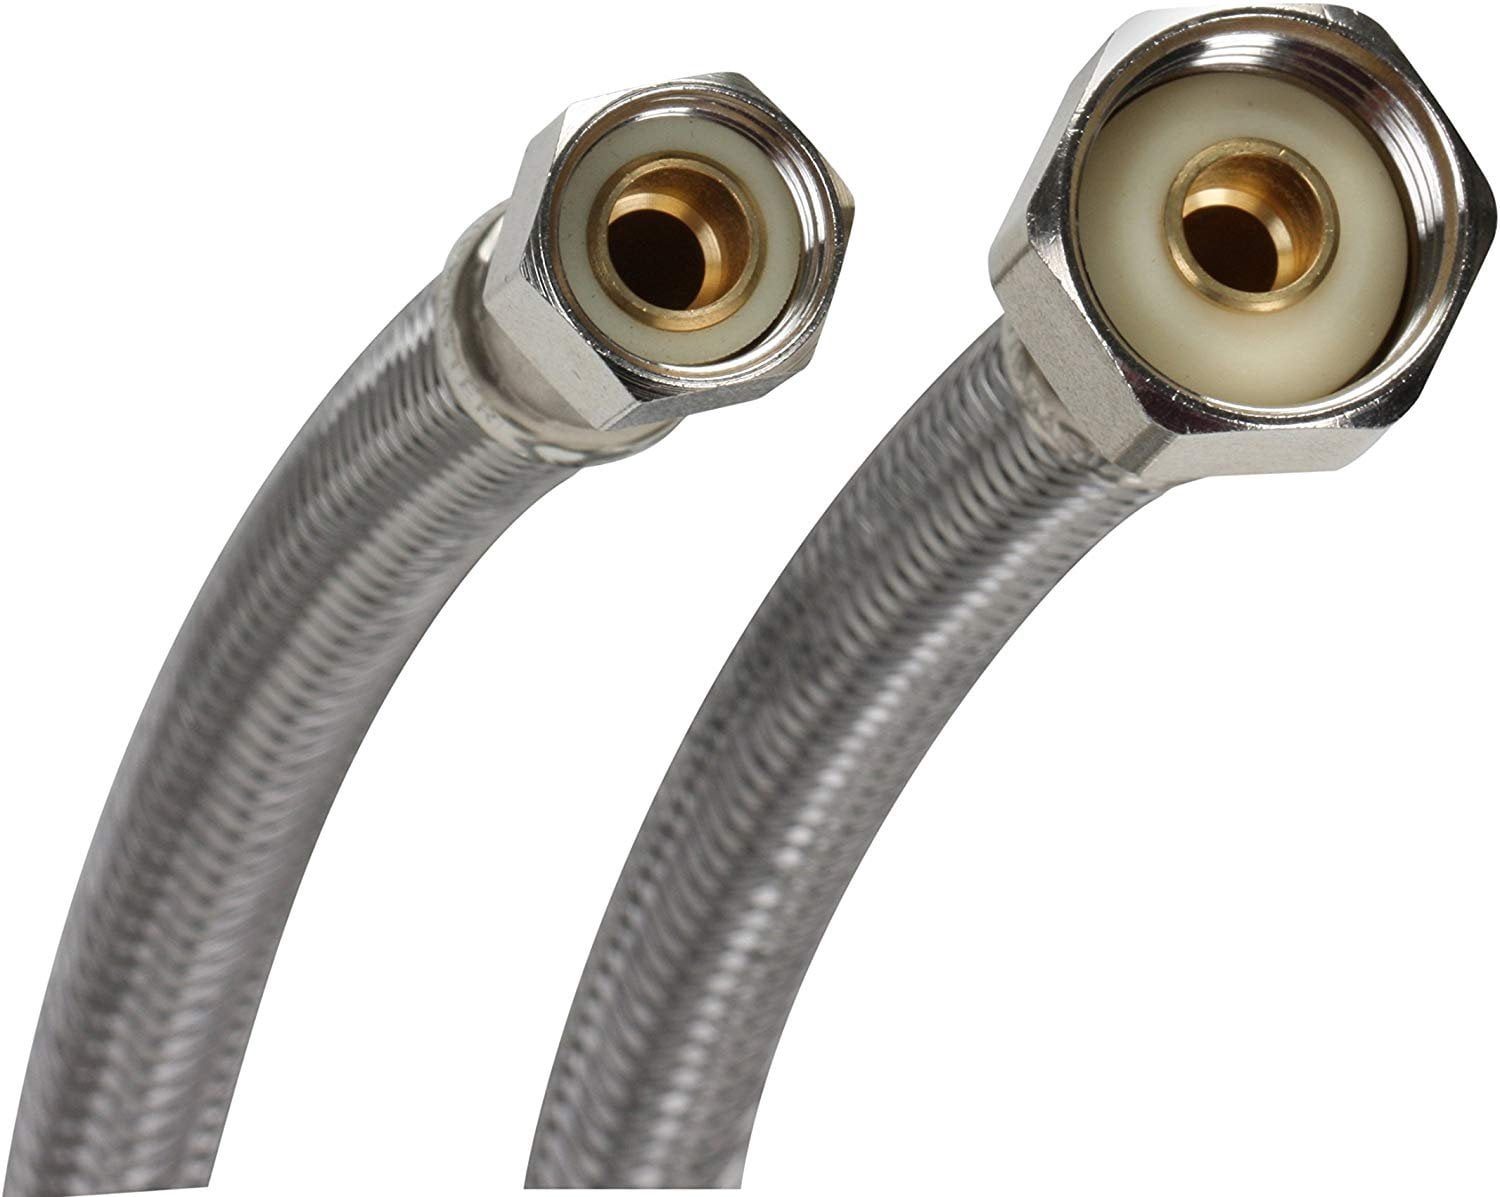 Fluidmaster B1F30 Faucet Connector, Braided Stainless Steel - 3/8